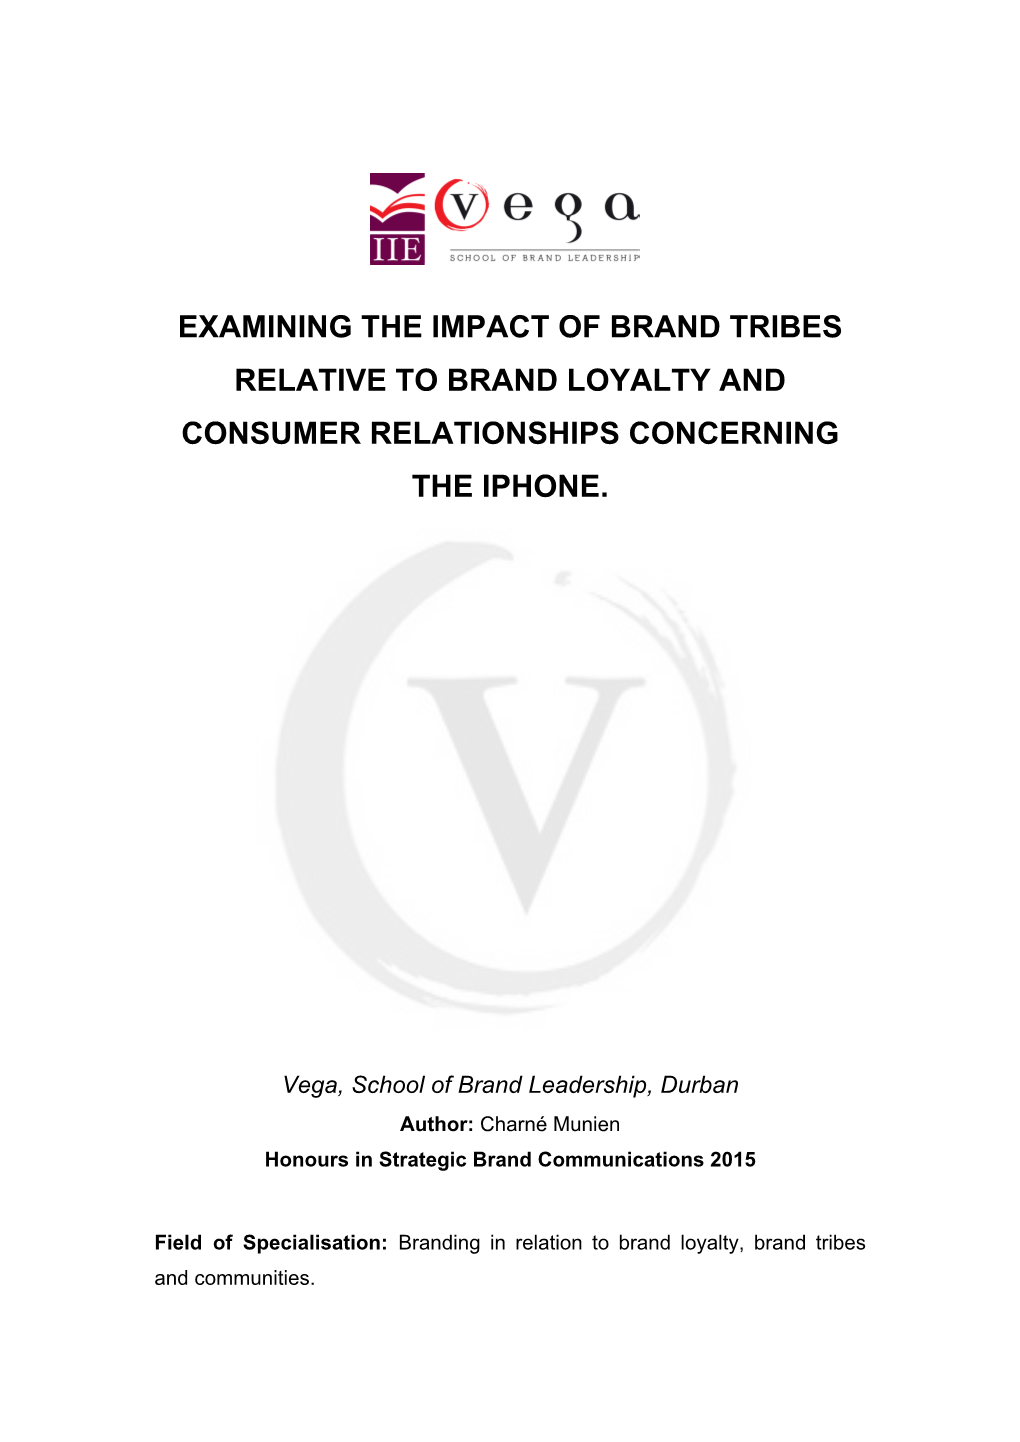 Examining the Impact of Brand Tribes Relative to Brand Loyalty and Consumer Relationships Concerning the Iphone